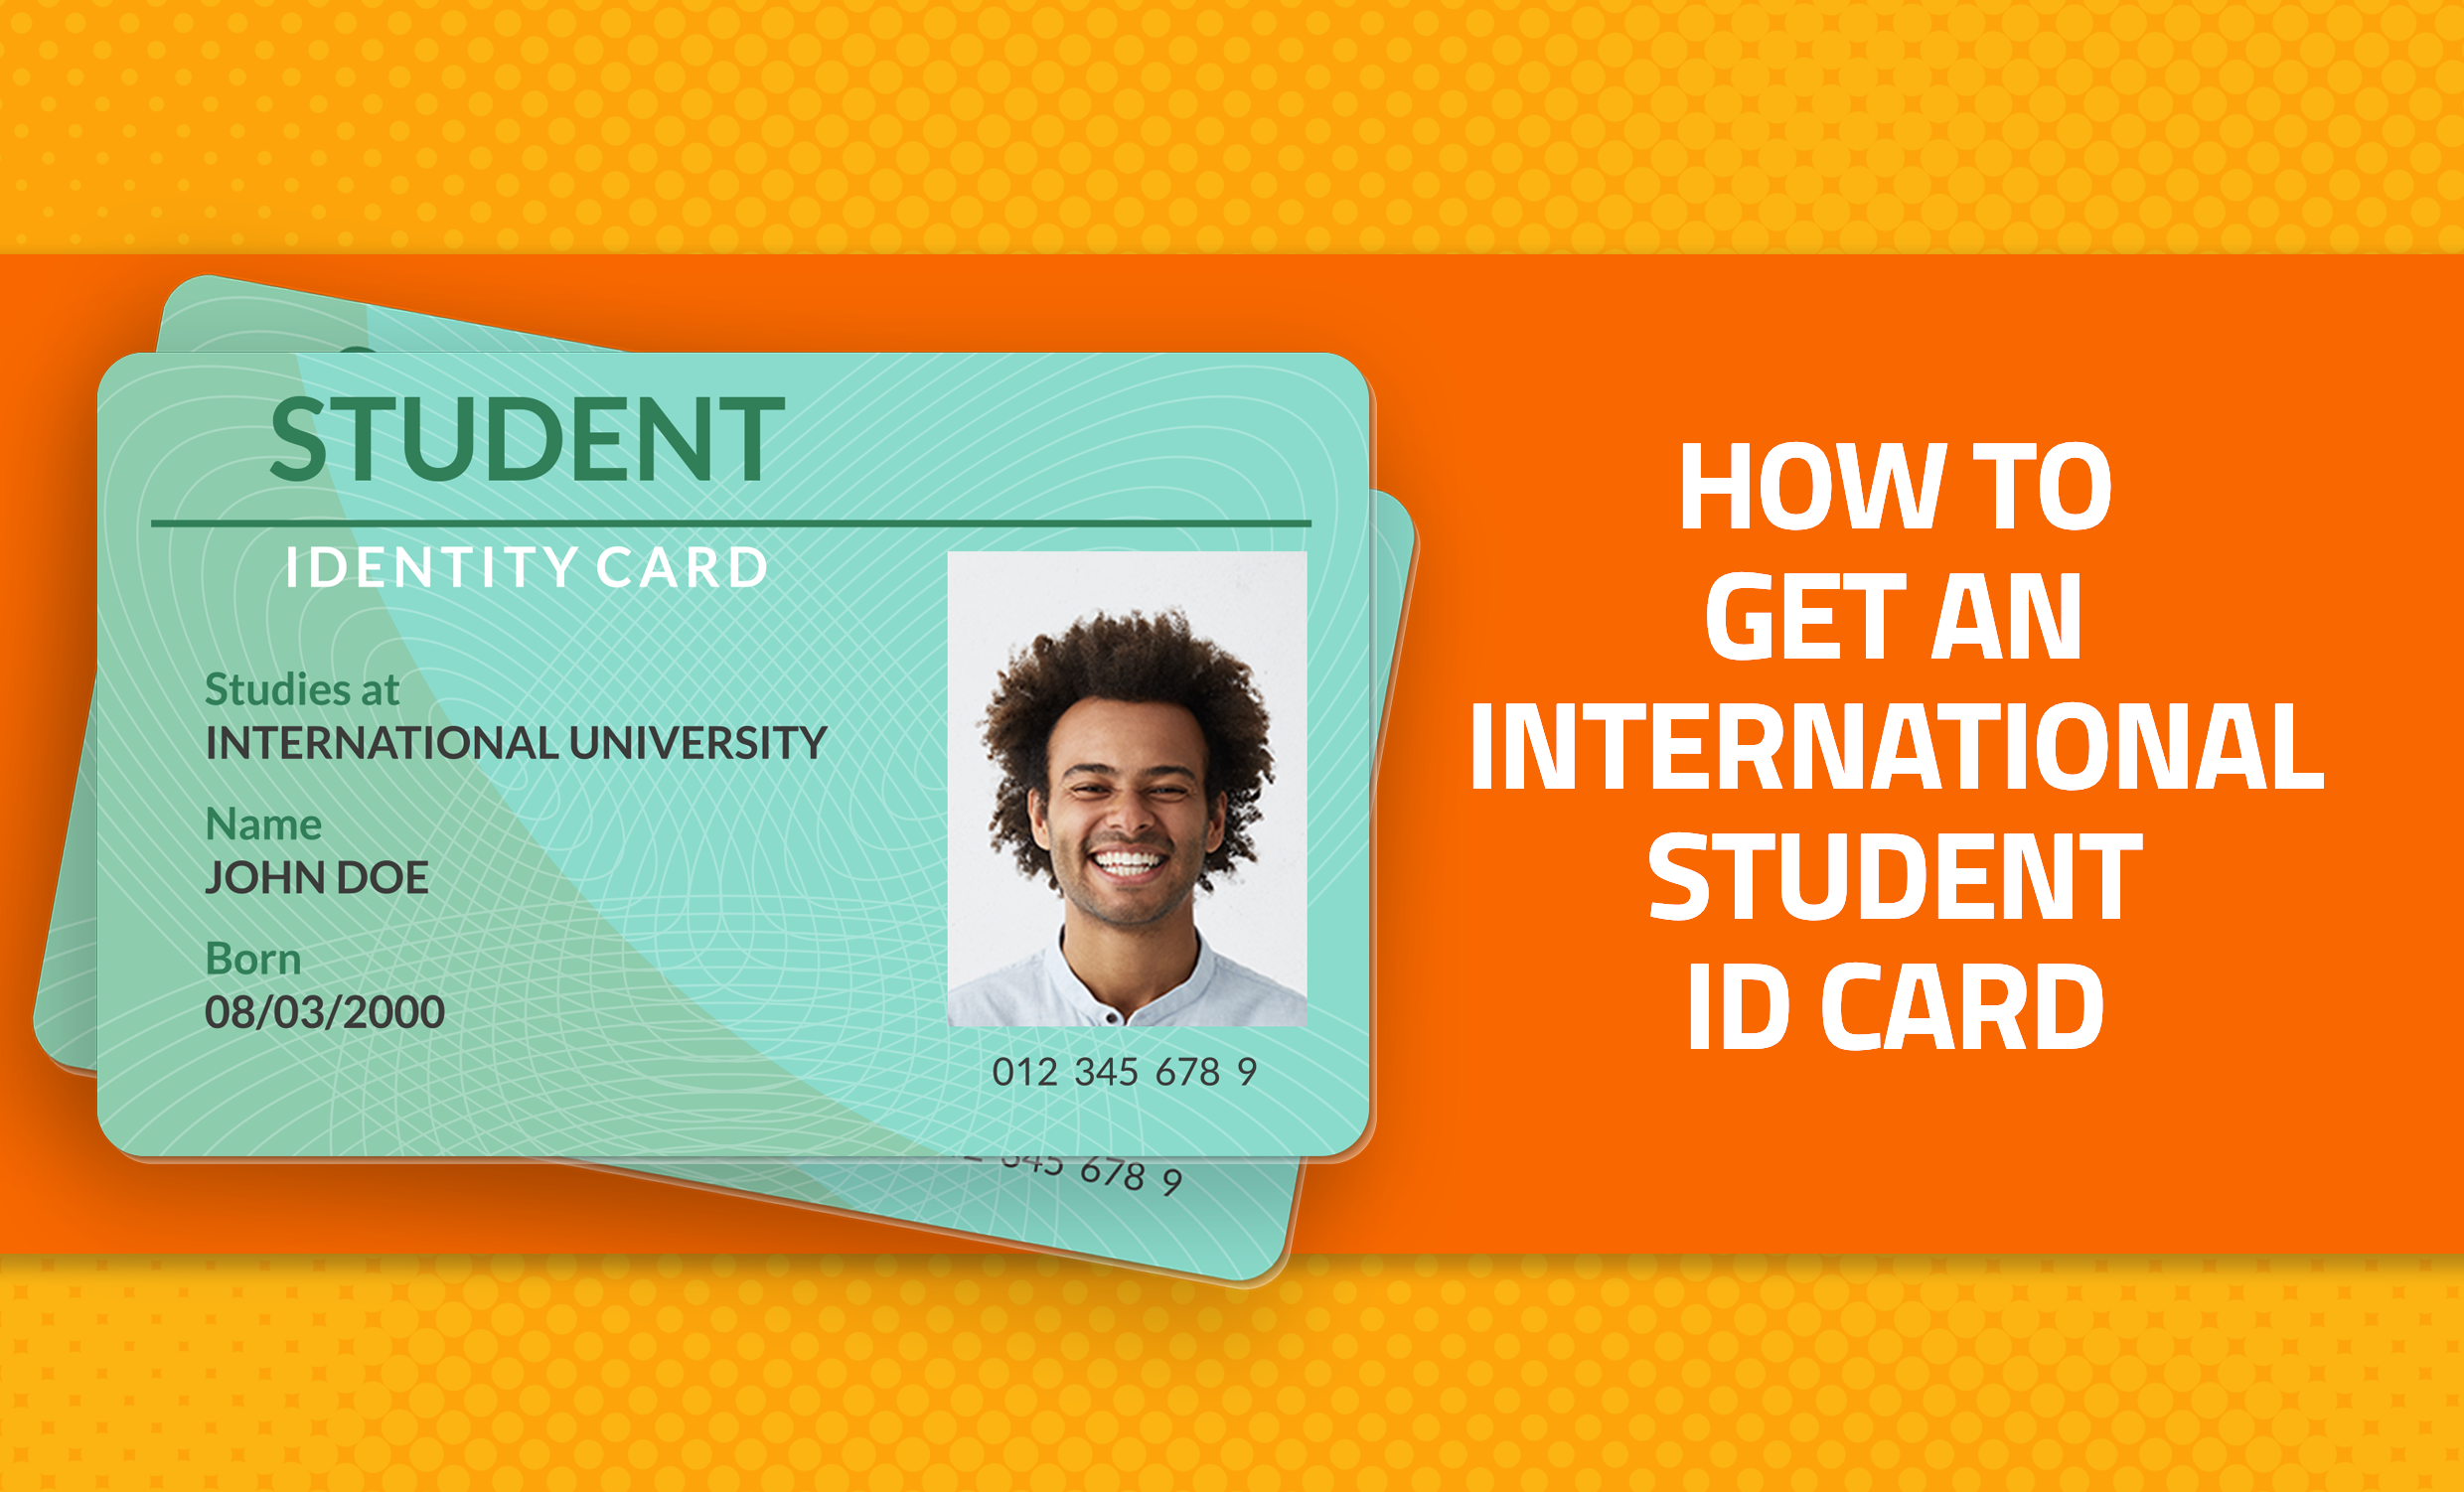 How to get an international student id card